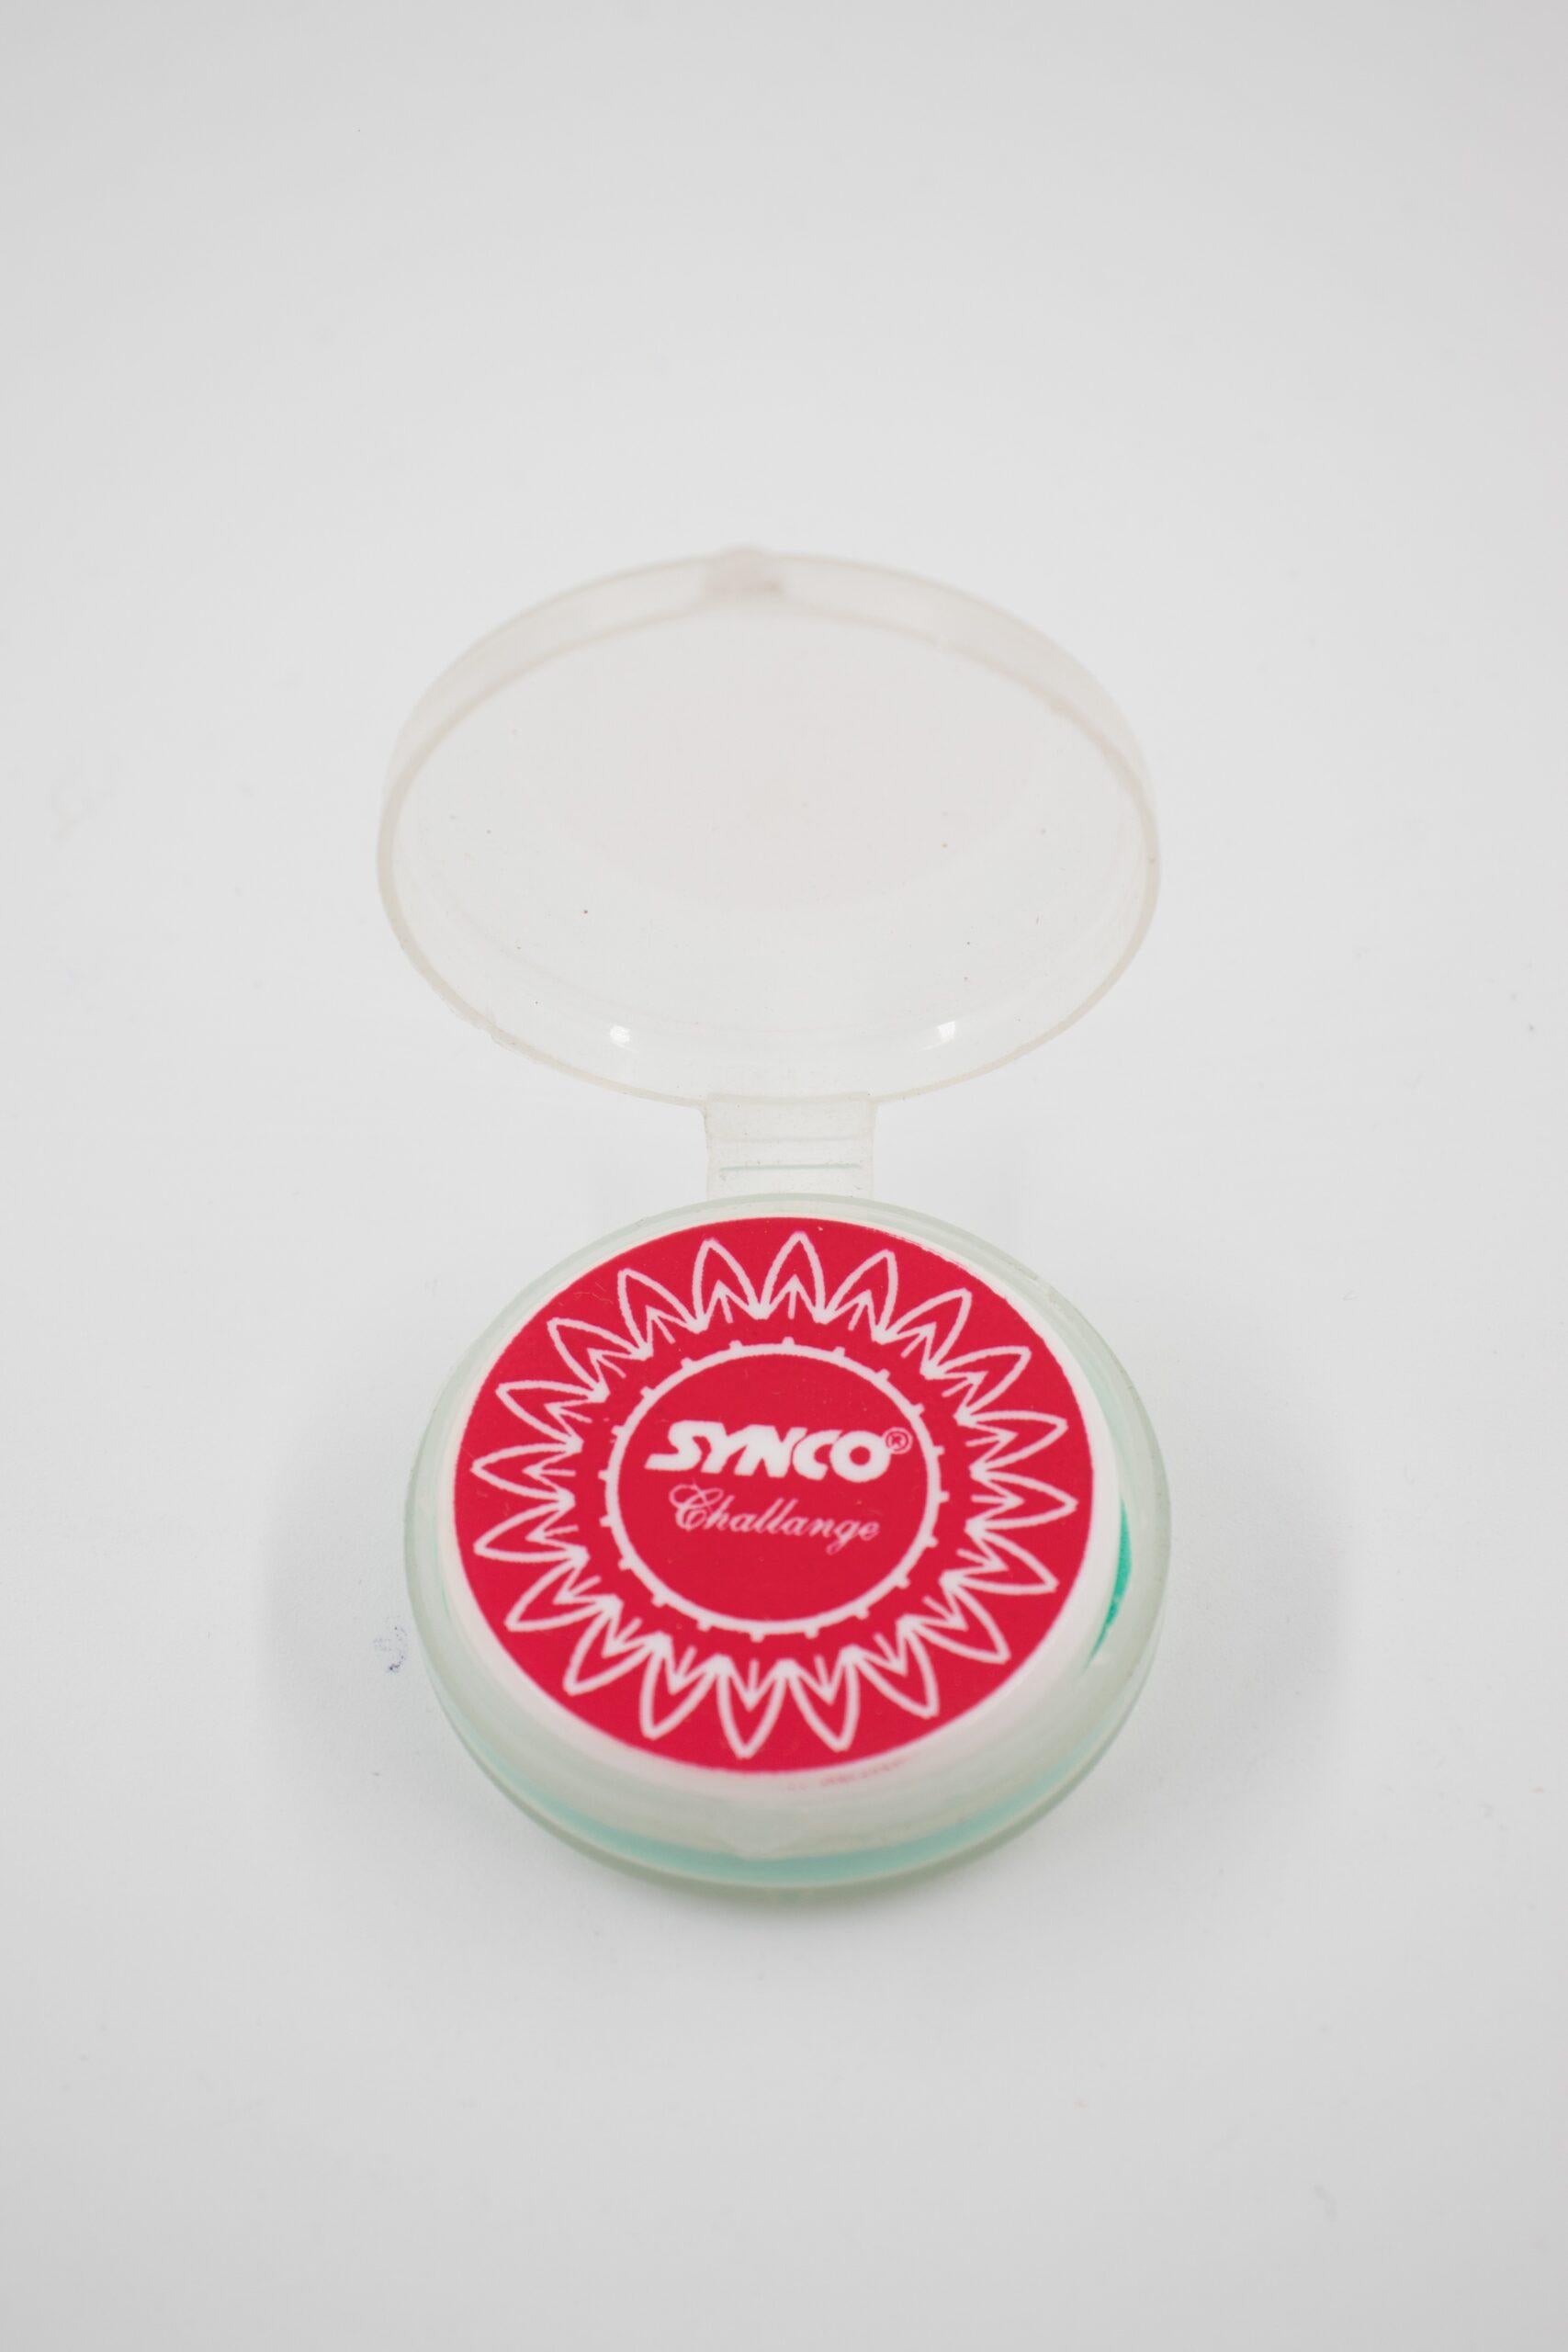 Synco Challenge carrom striker professional, Assorted color - 3